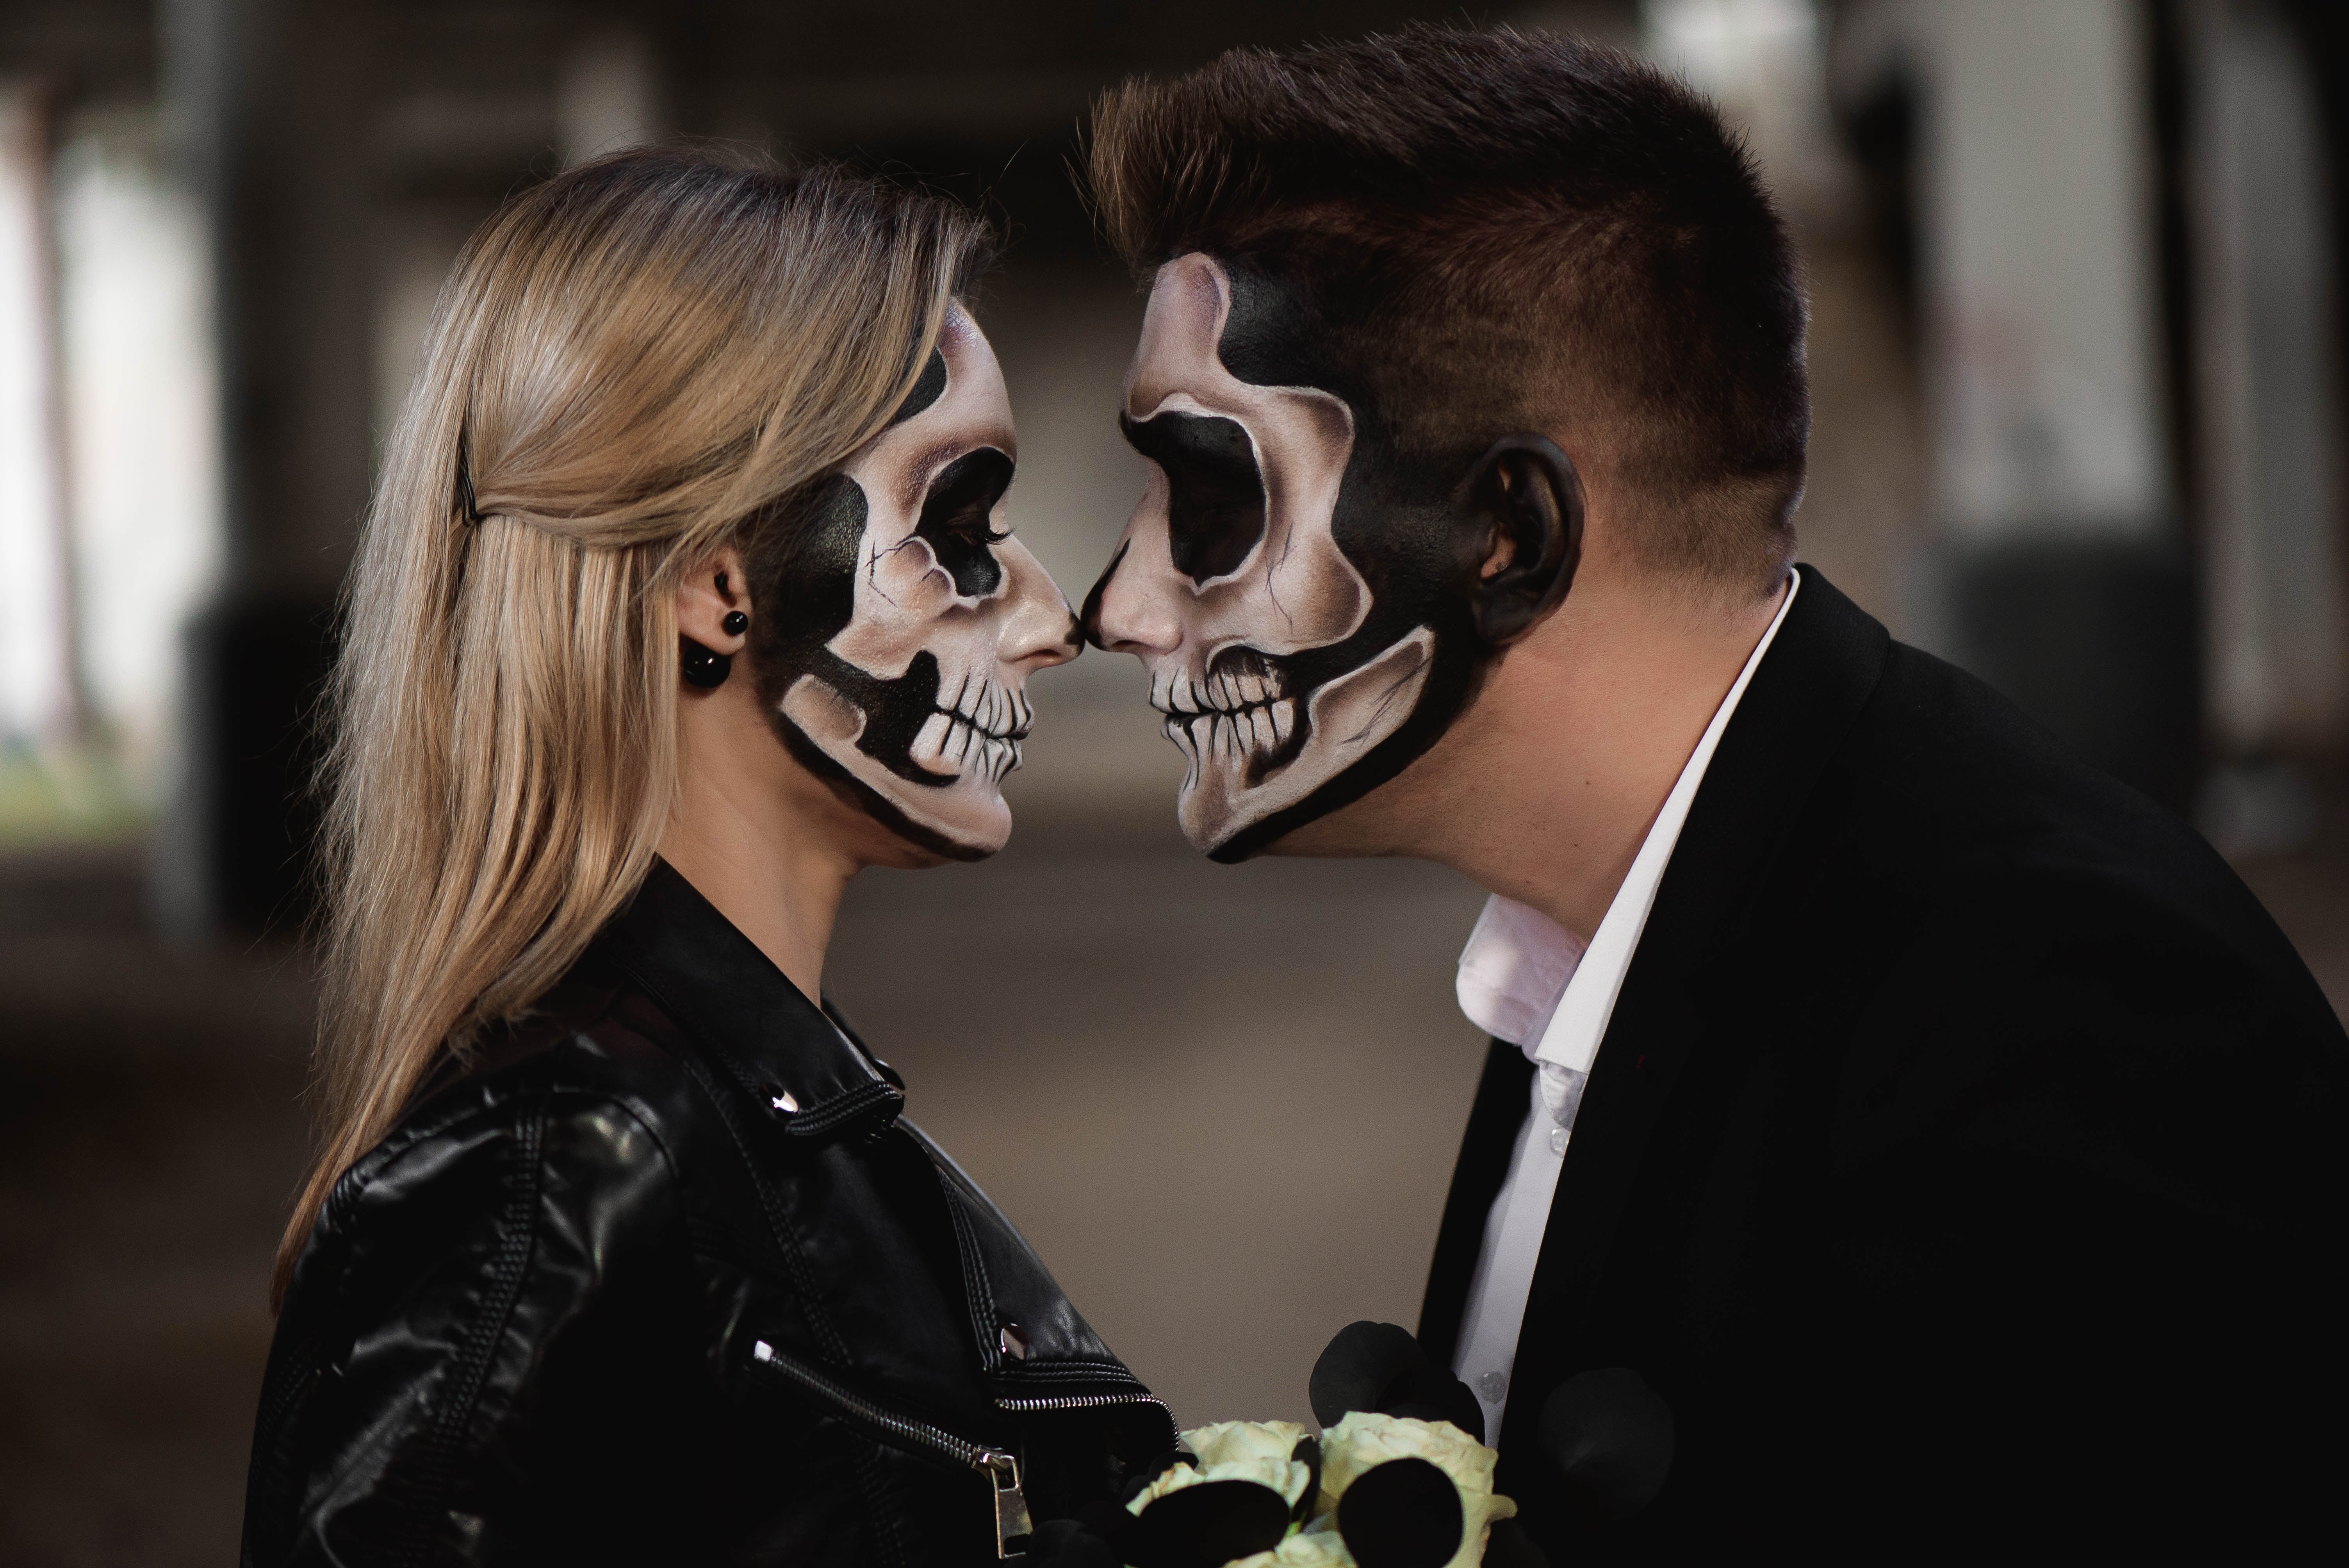 72 Easy Couples' Costumes For When You Want to Look Cute Without